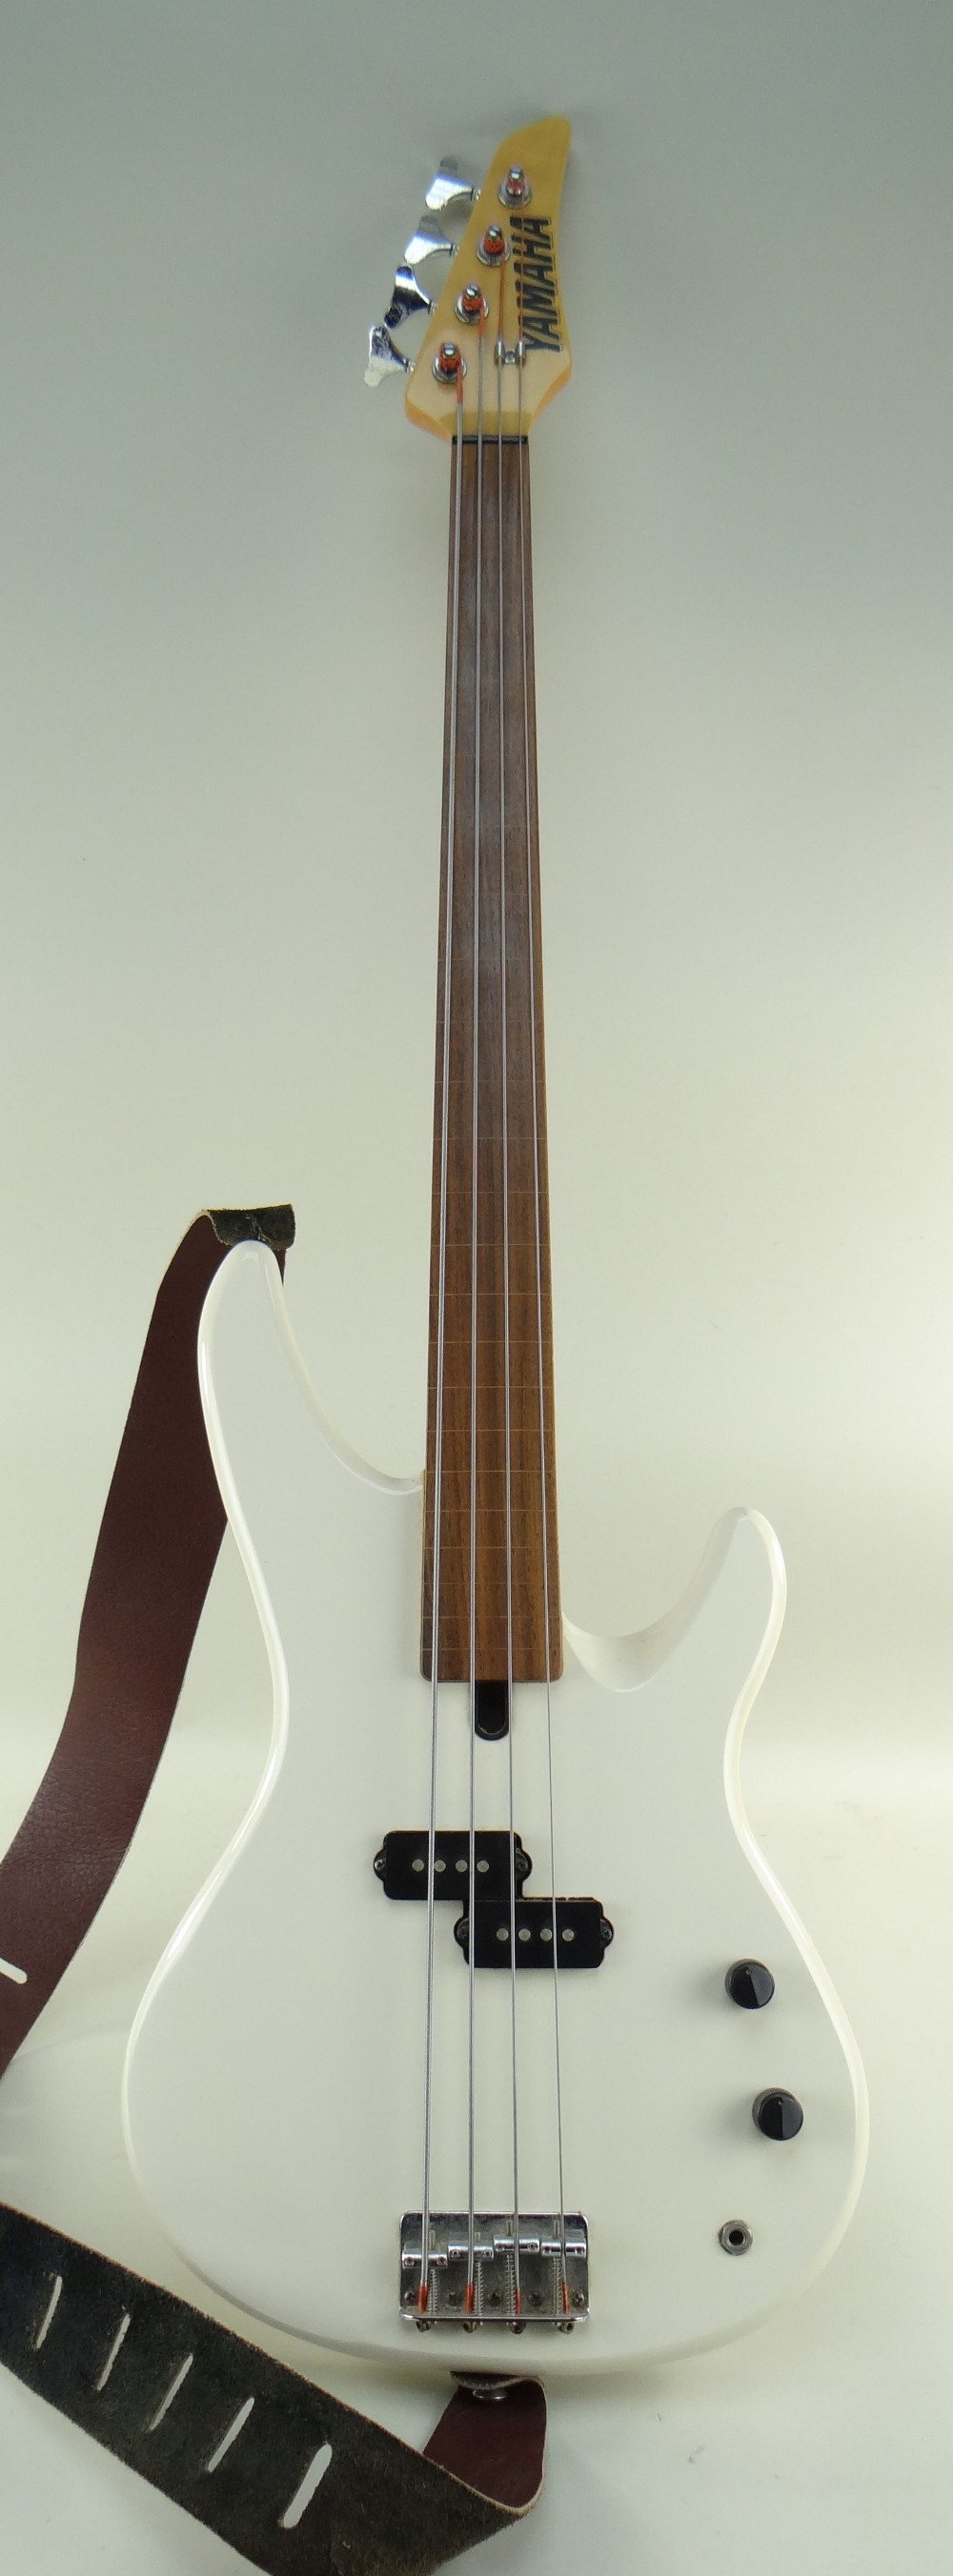 YAMAHA FRETLESS BASS GUITAR, model RBX250F, off-white finish with inlaid line fretboard, 113cms long - Image 4 of 5